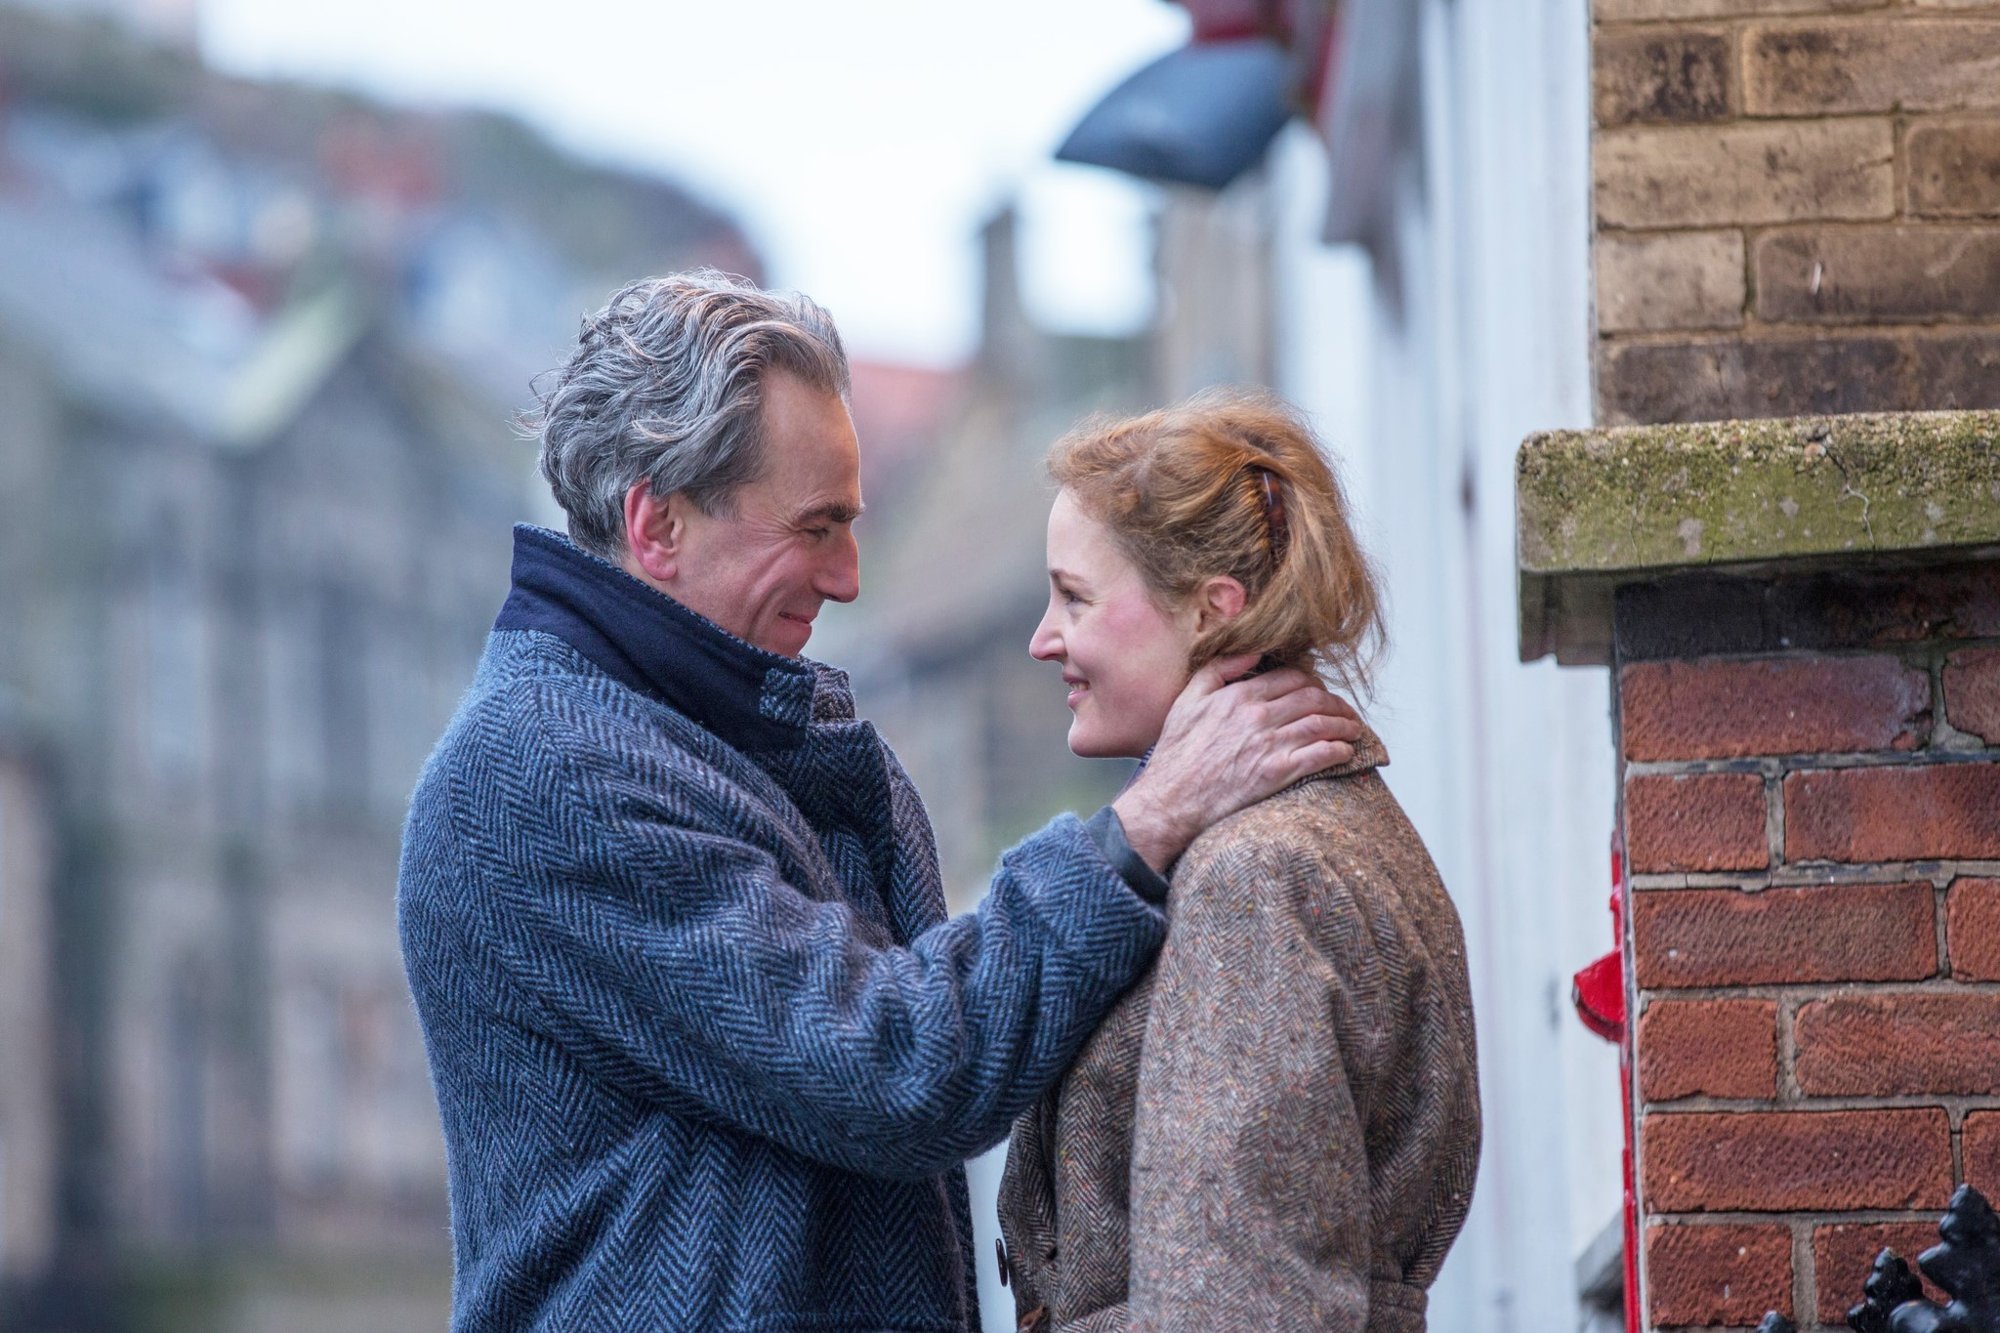 Daniel Day-Lewis stars as Reynolds Woodcock and Vicky Krieps stars as Alma in Focus Features' Phantom Thread (2017)